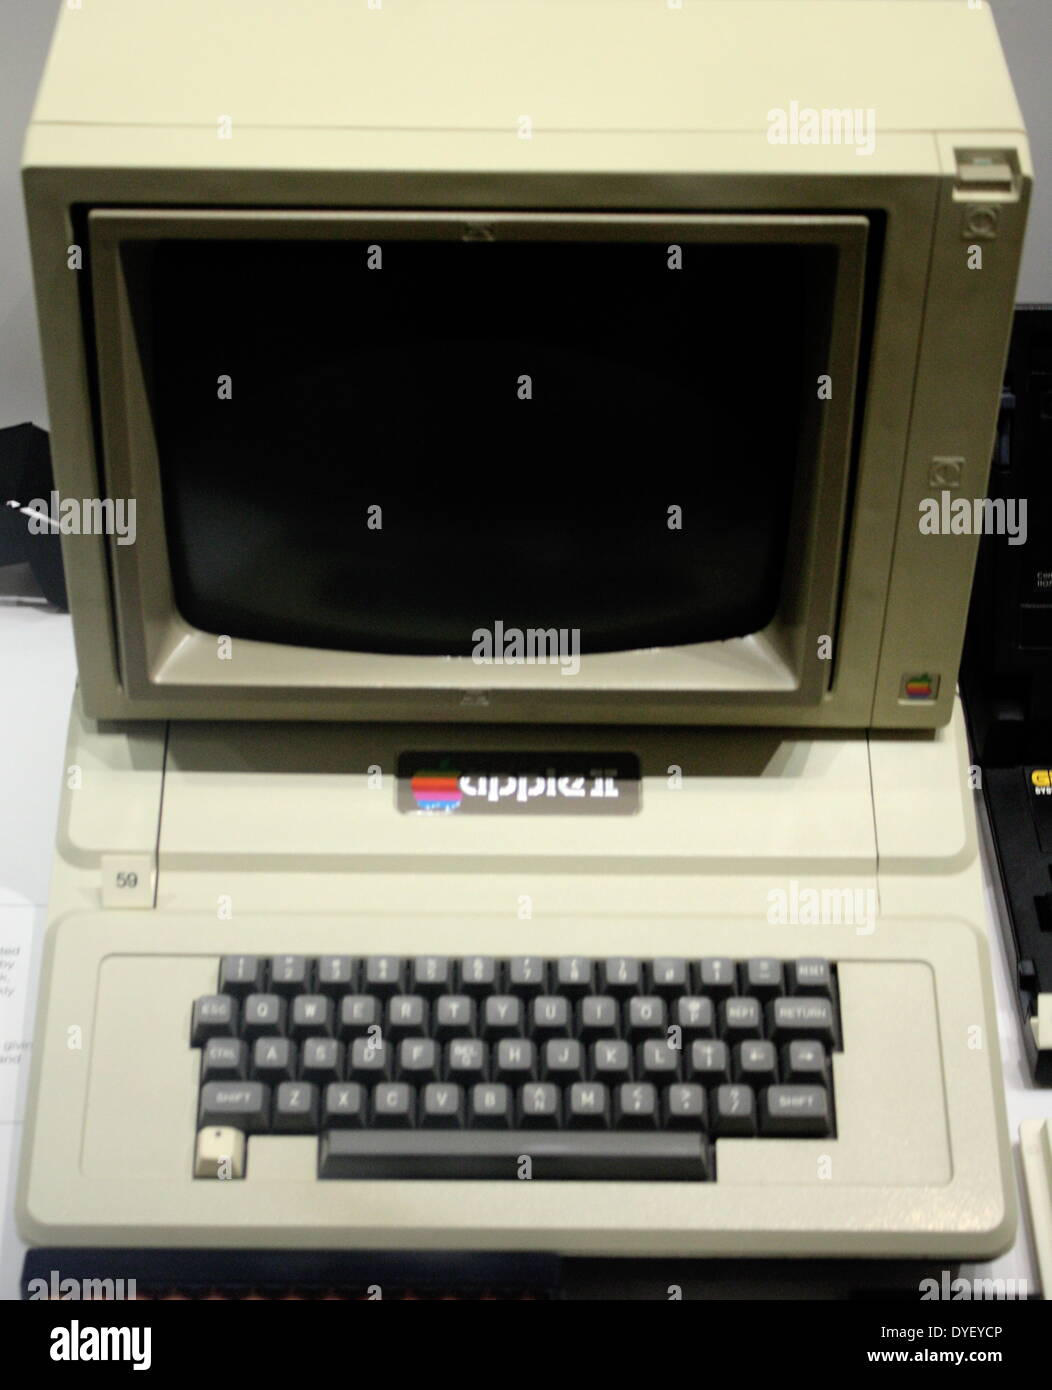 Desktop Computer from 1977. An example of the 1st personal computer with colour graphics: 'The Apple II'. In 1976 Apple released their 1st computer, and this is based on that design. It established the desktop computer market. Stock Photo